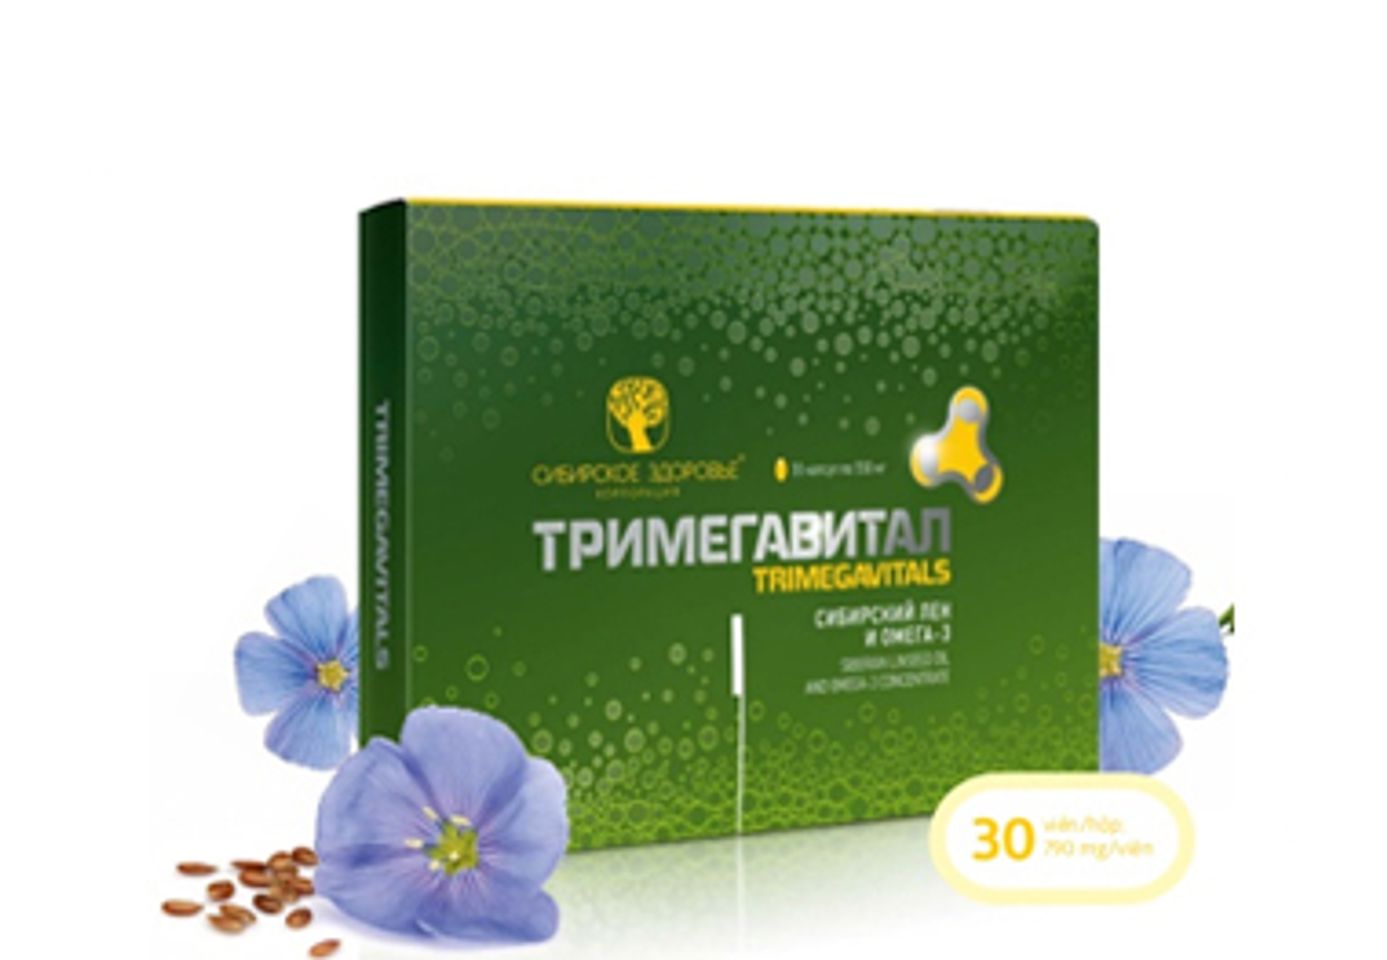 Trimegavitals Siberian linseed oil and omega 3 concentrate 1